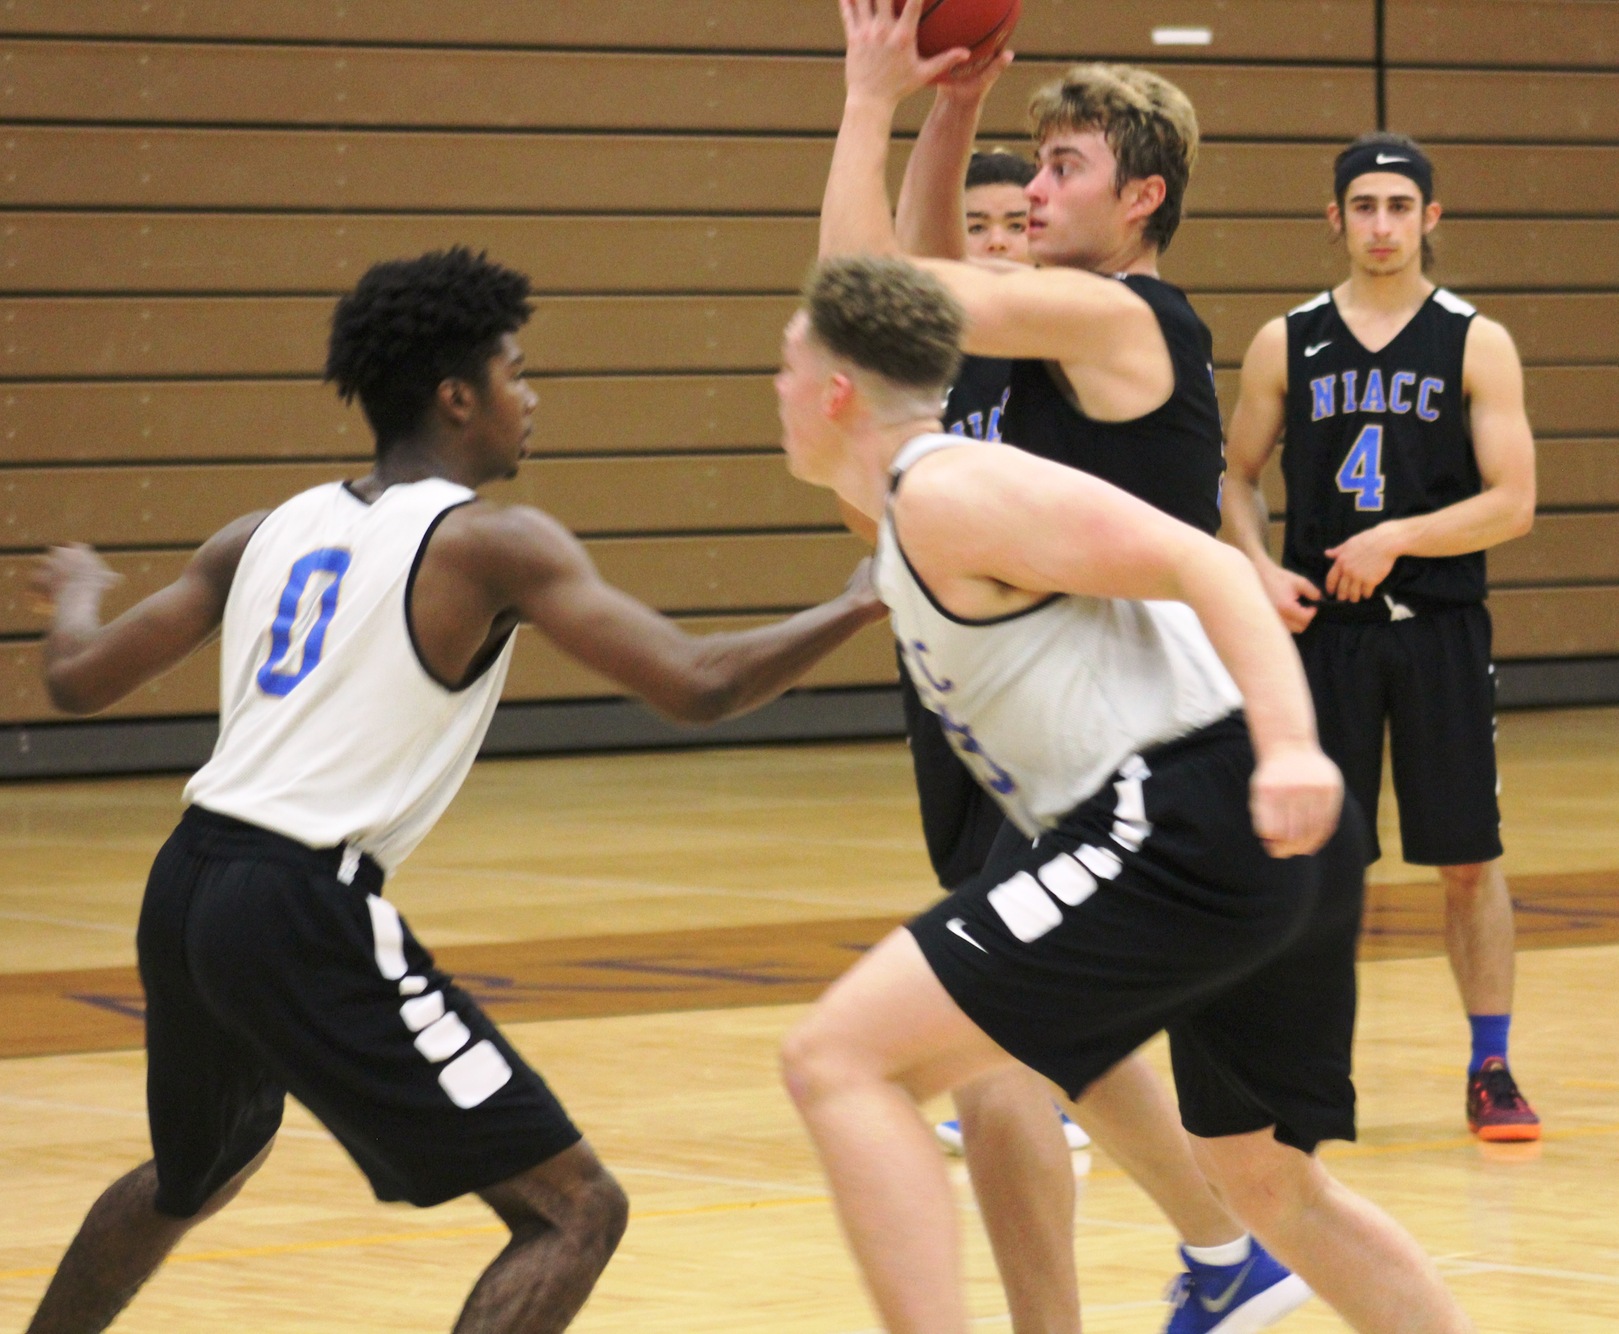 Freshman Mac Skogen looks to pass during Monday's practice in the NIACC gym.